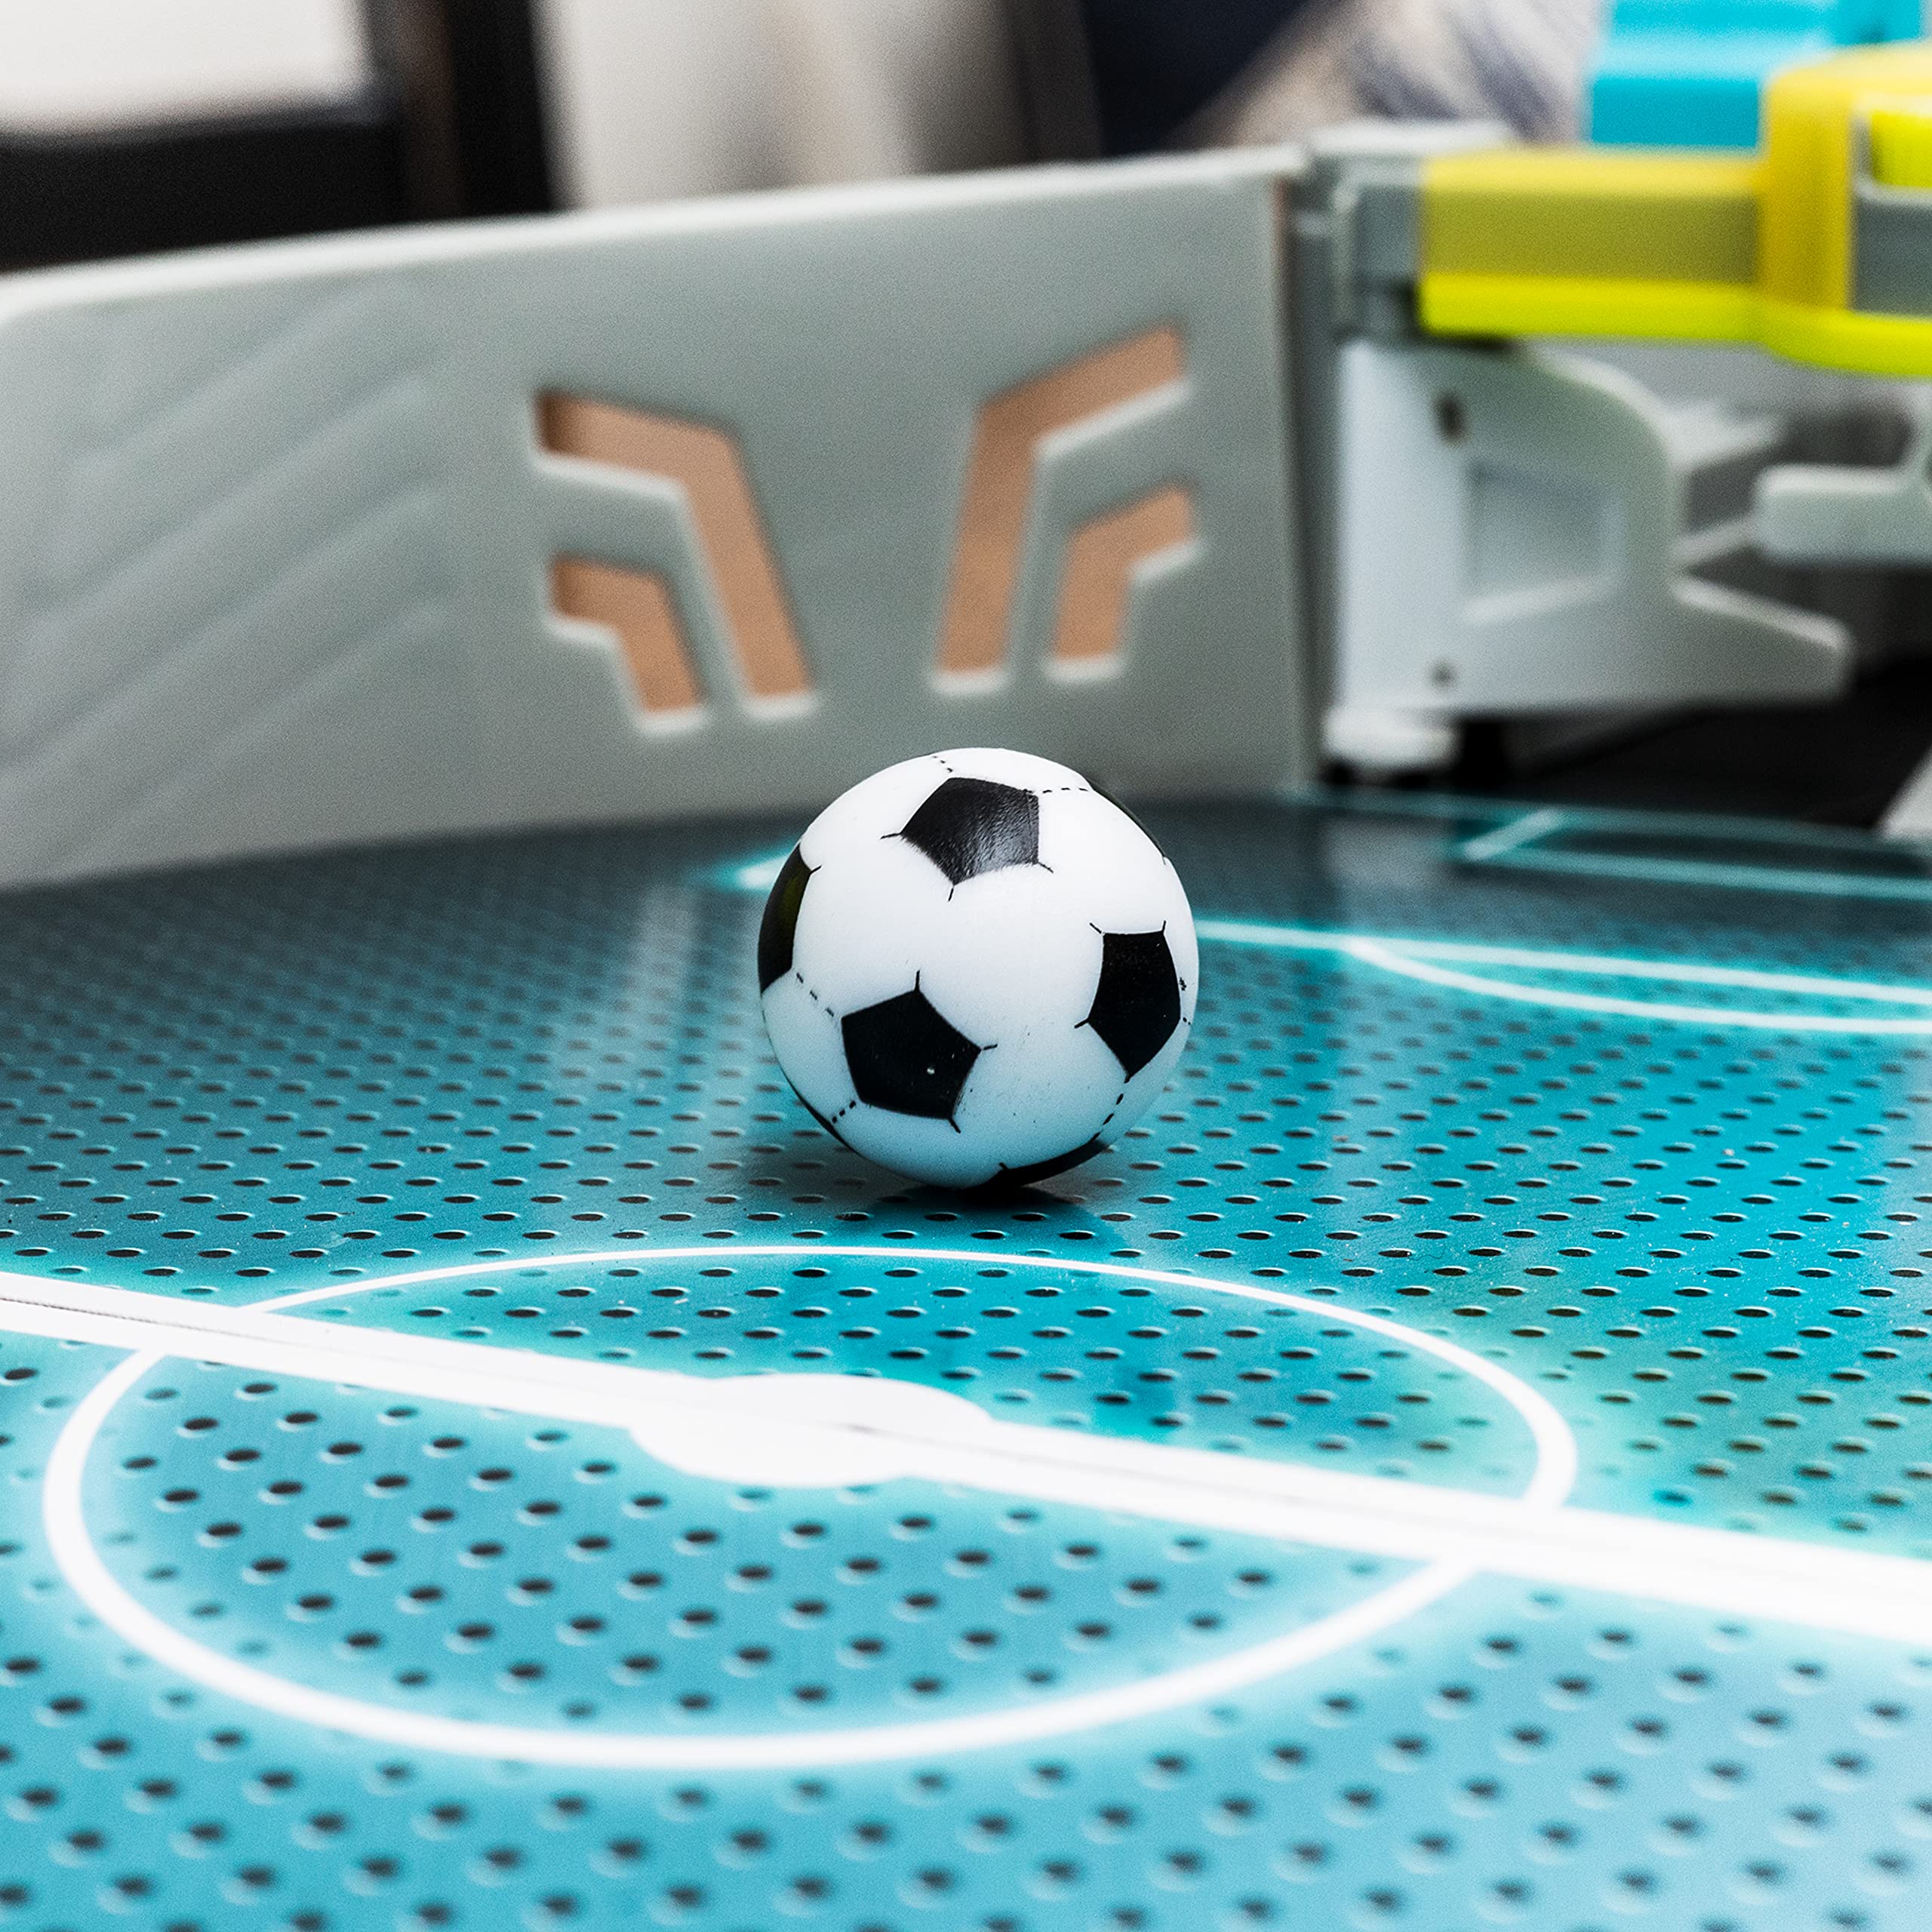 Franklin Sports Mini Tabletop Soccer Shootout Game - Arcade Style Soccer Table Game for All Ages- Electronic LED Scoreboard and Sounds